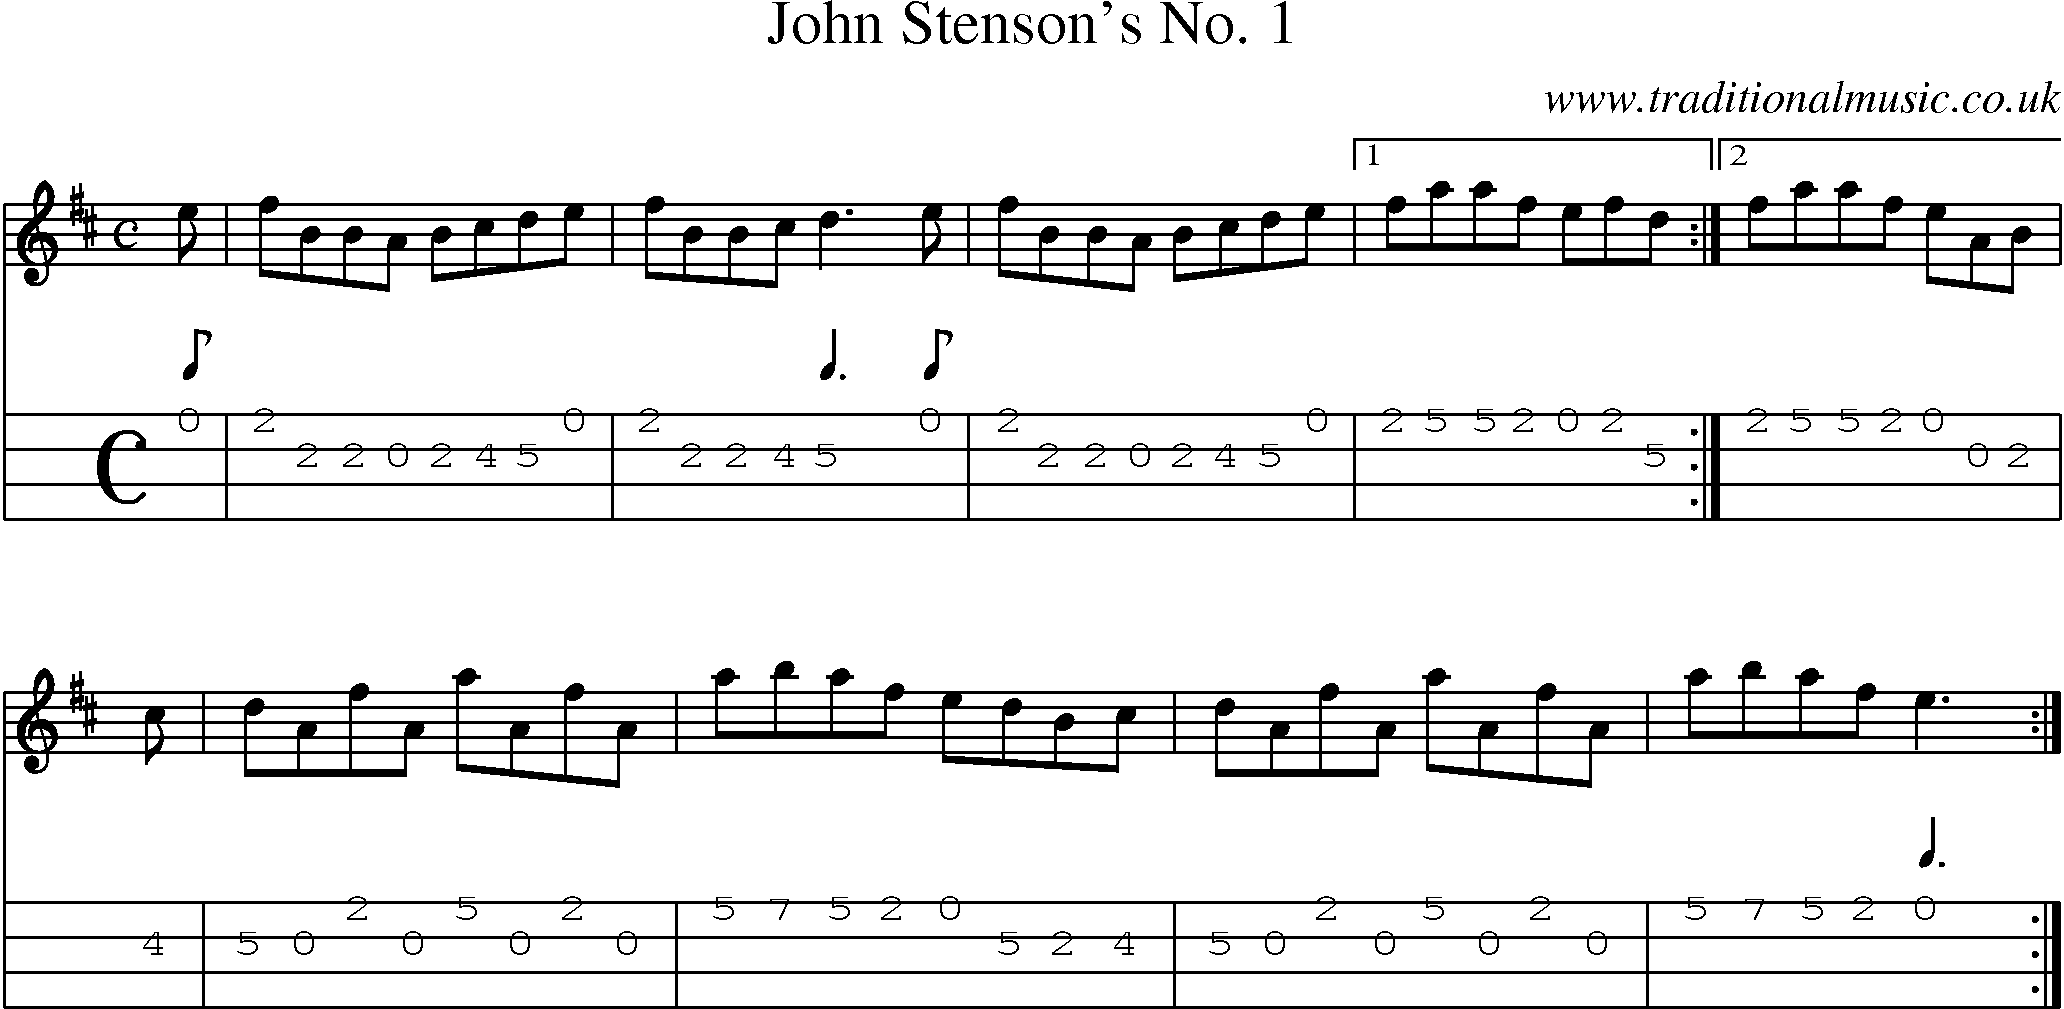 Music Score and Mandolin Tabs for John Stensons No 1